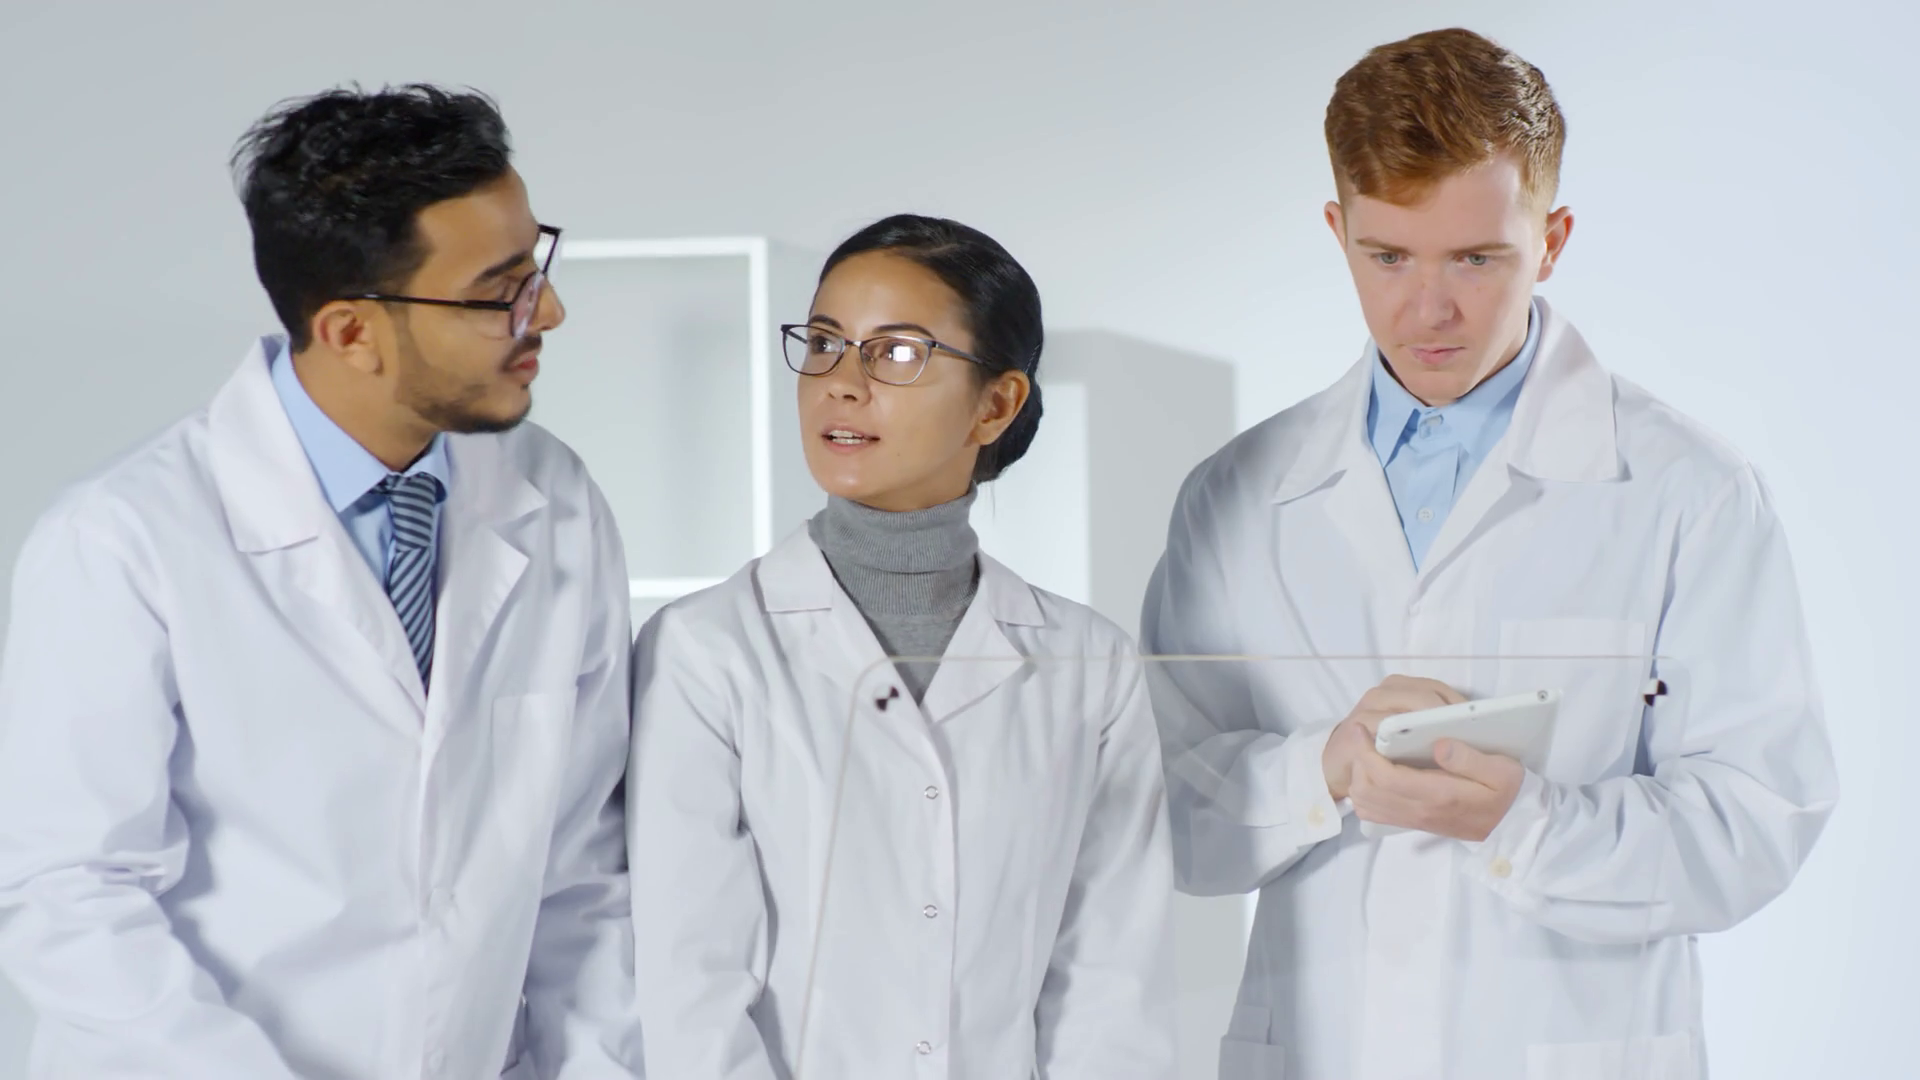 Medium shot of three diverse scientists in lab coats standing together at invisible AR display of futuristic computer and talking. Video suitable for adding AR graphics Stock Video Footage